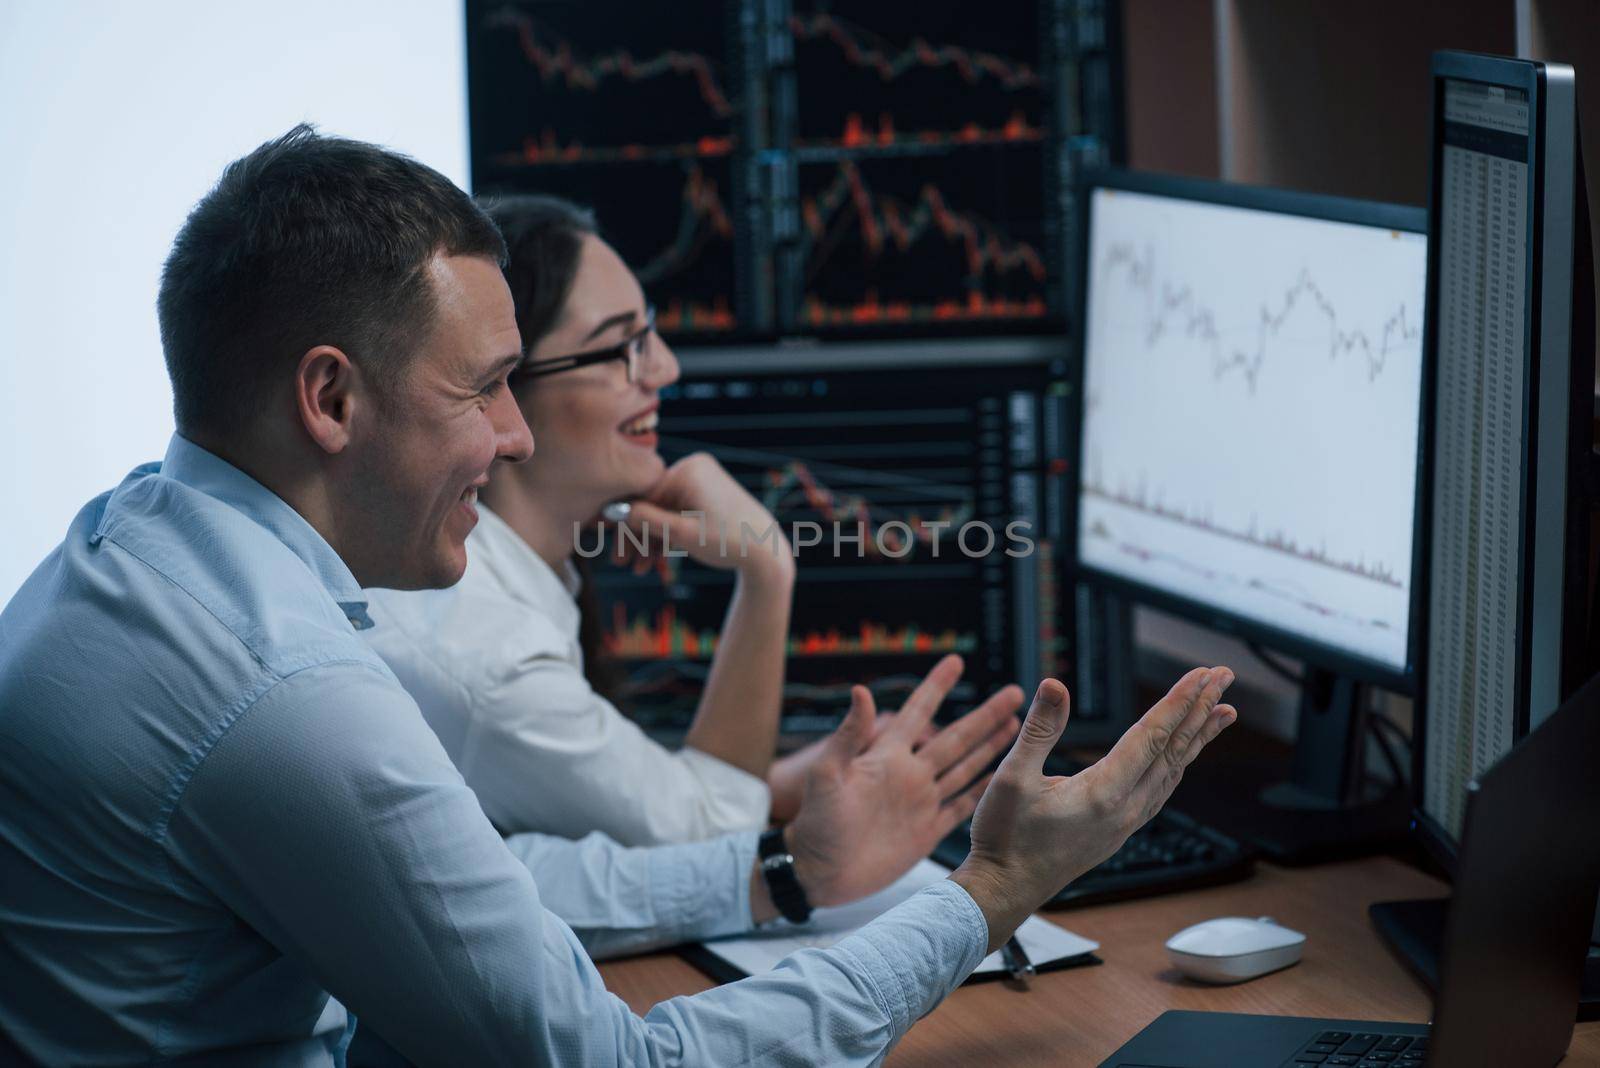 Cheerful people have success. Team of stockbrokers are having a conversation in a office with multiple display screens.